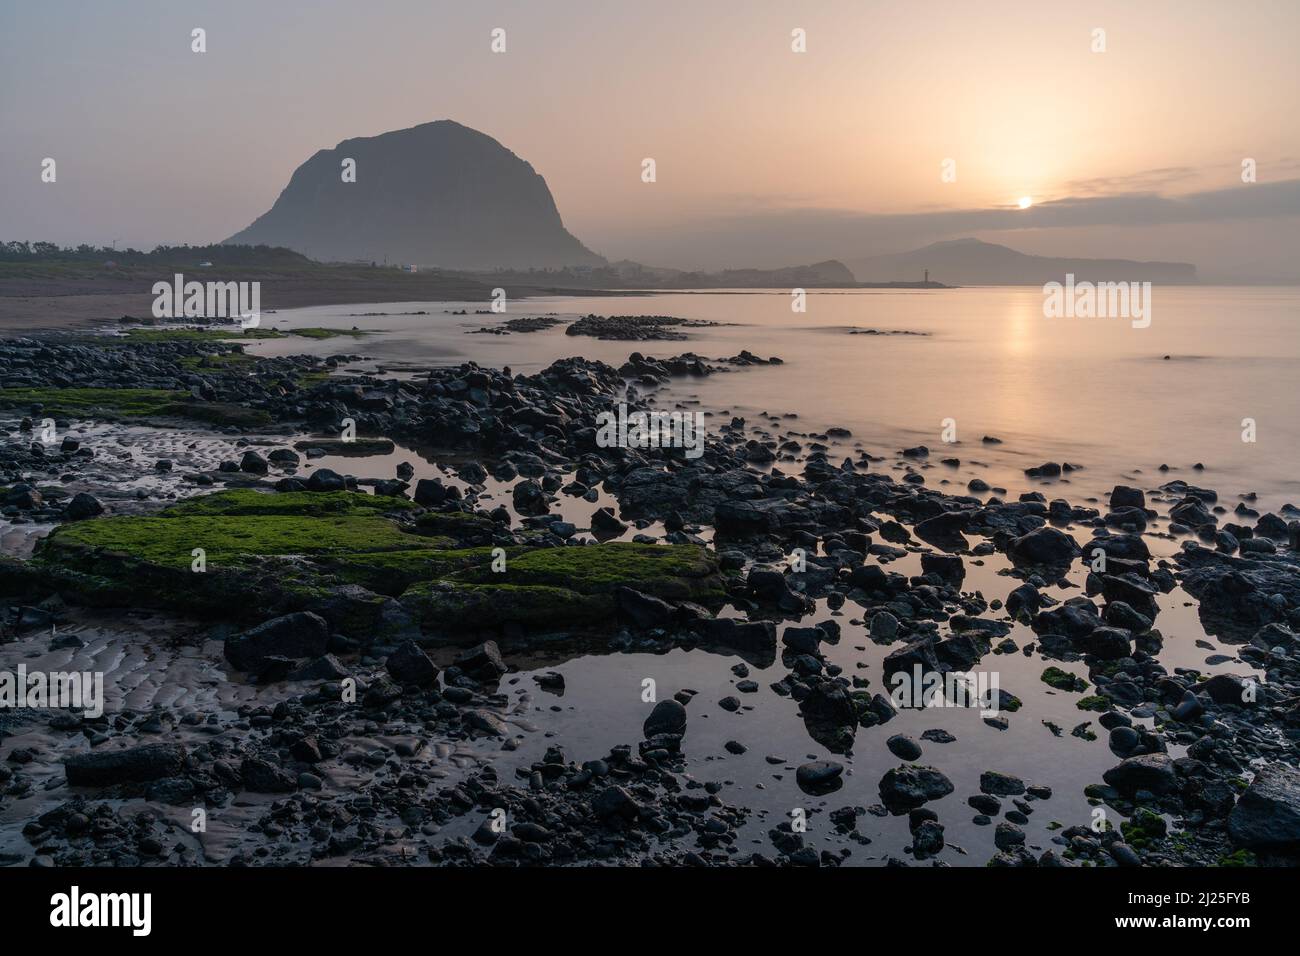 Sunrise over Sagye Beach at low tide, with the volcanic oreum Sangbansan rising behind, an iconic sight on Jeju Island, South Korea Stock Photo